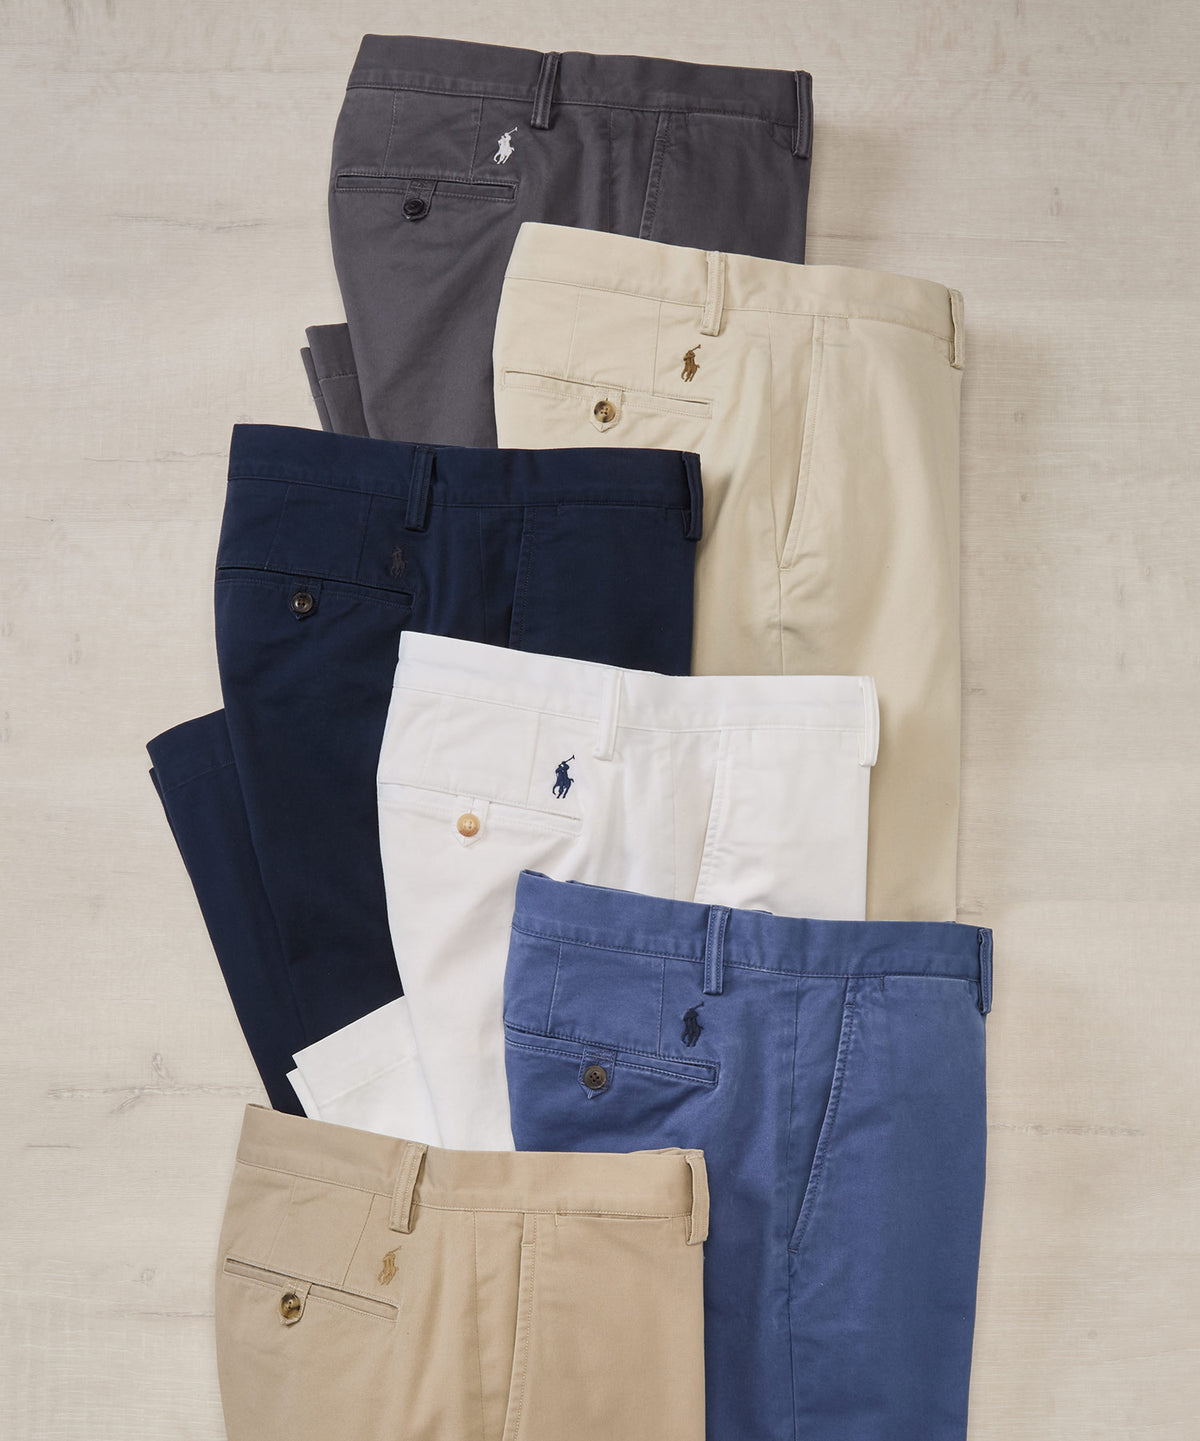 Polo Ralph Lauren Stretch Flat Front Chino Pant, Big & Tall